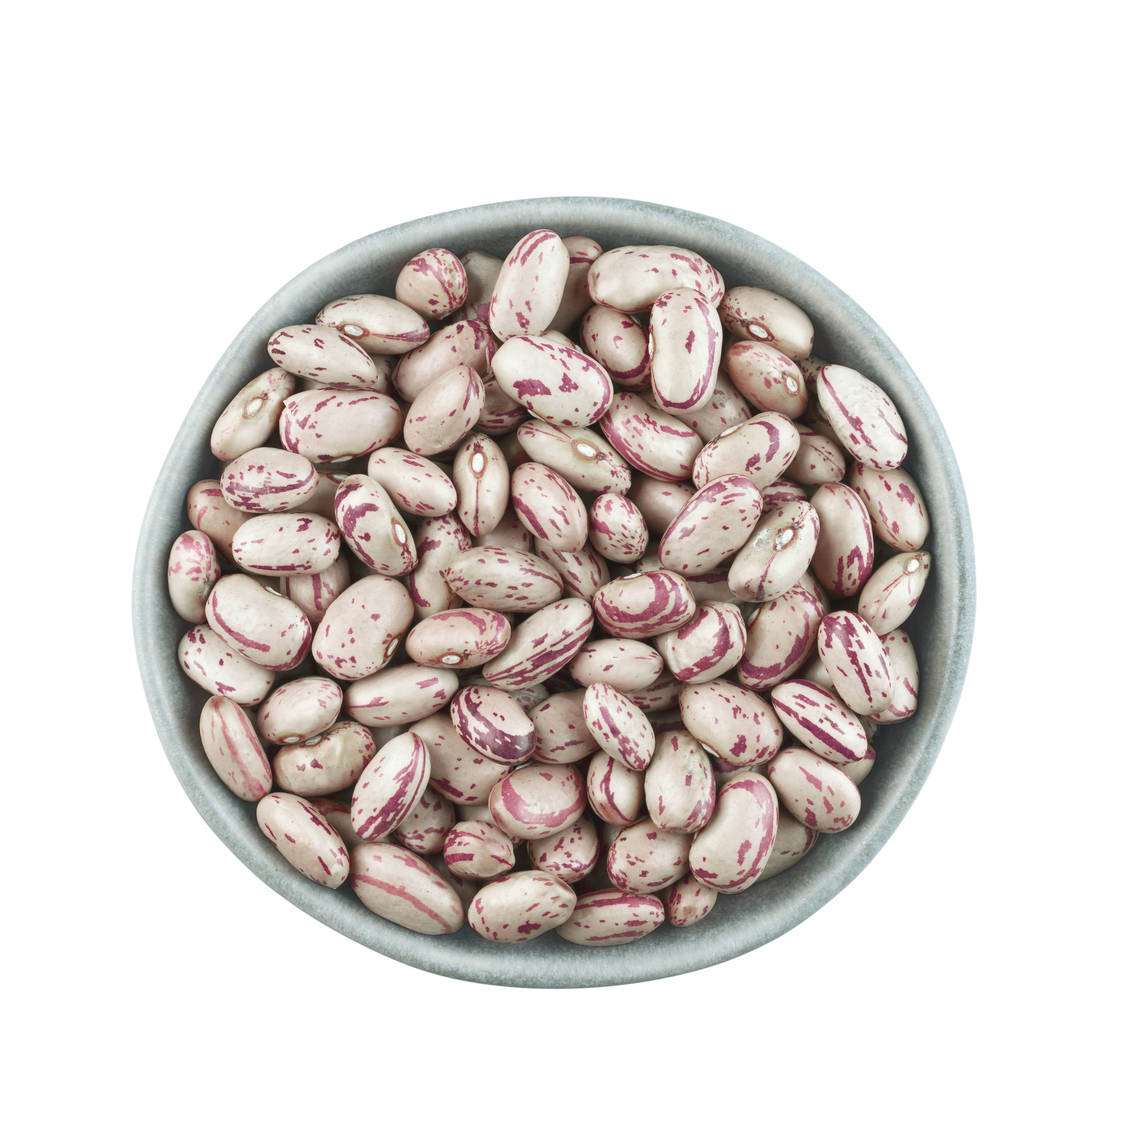 Cranberry beans owe their name to the beautiful cranberry-coloured markings on the outer layer of their skin.